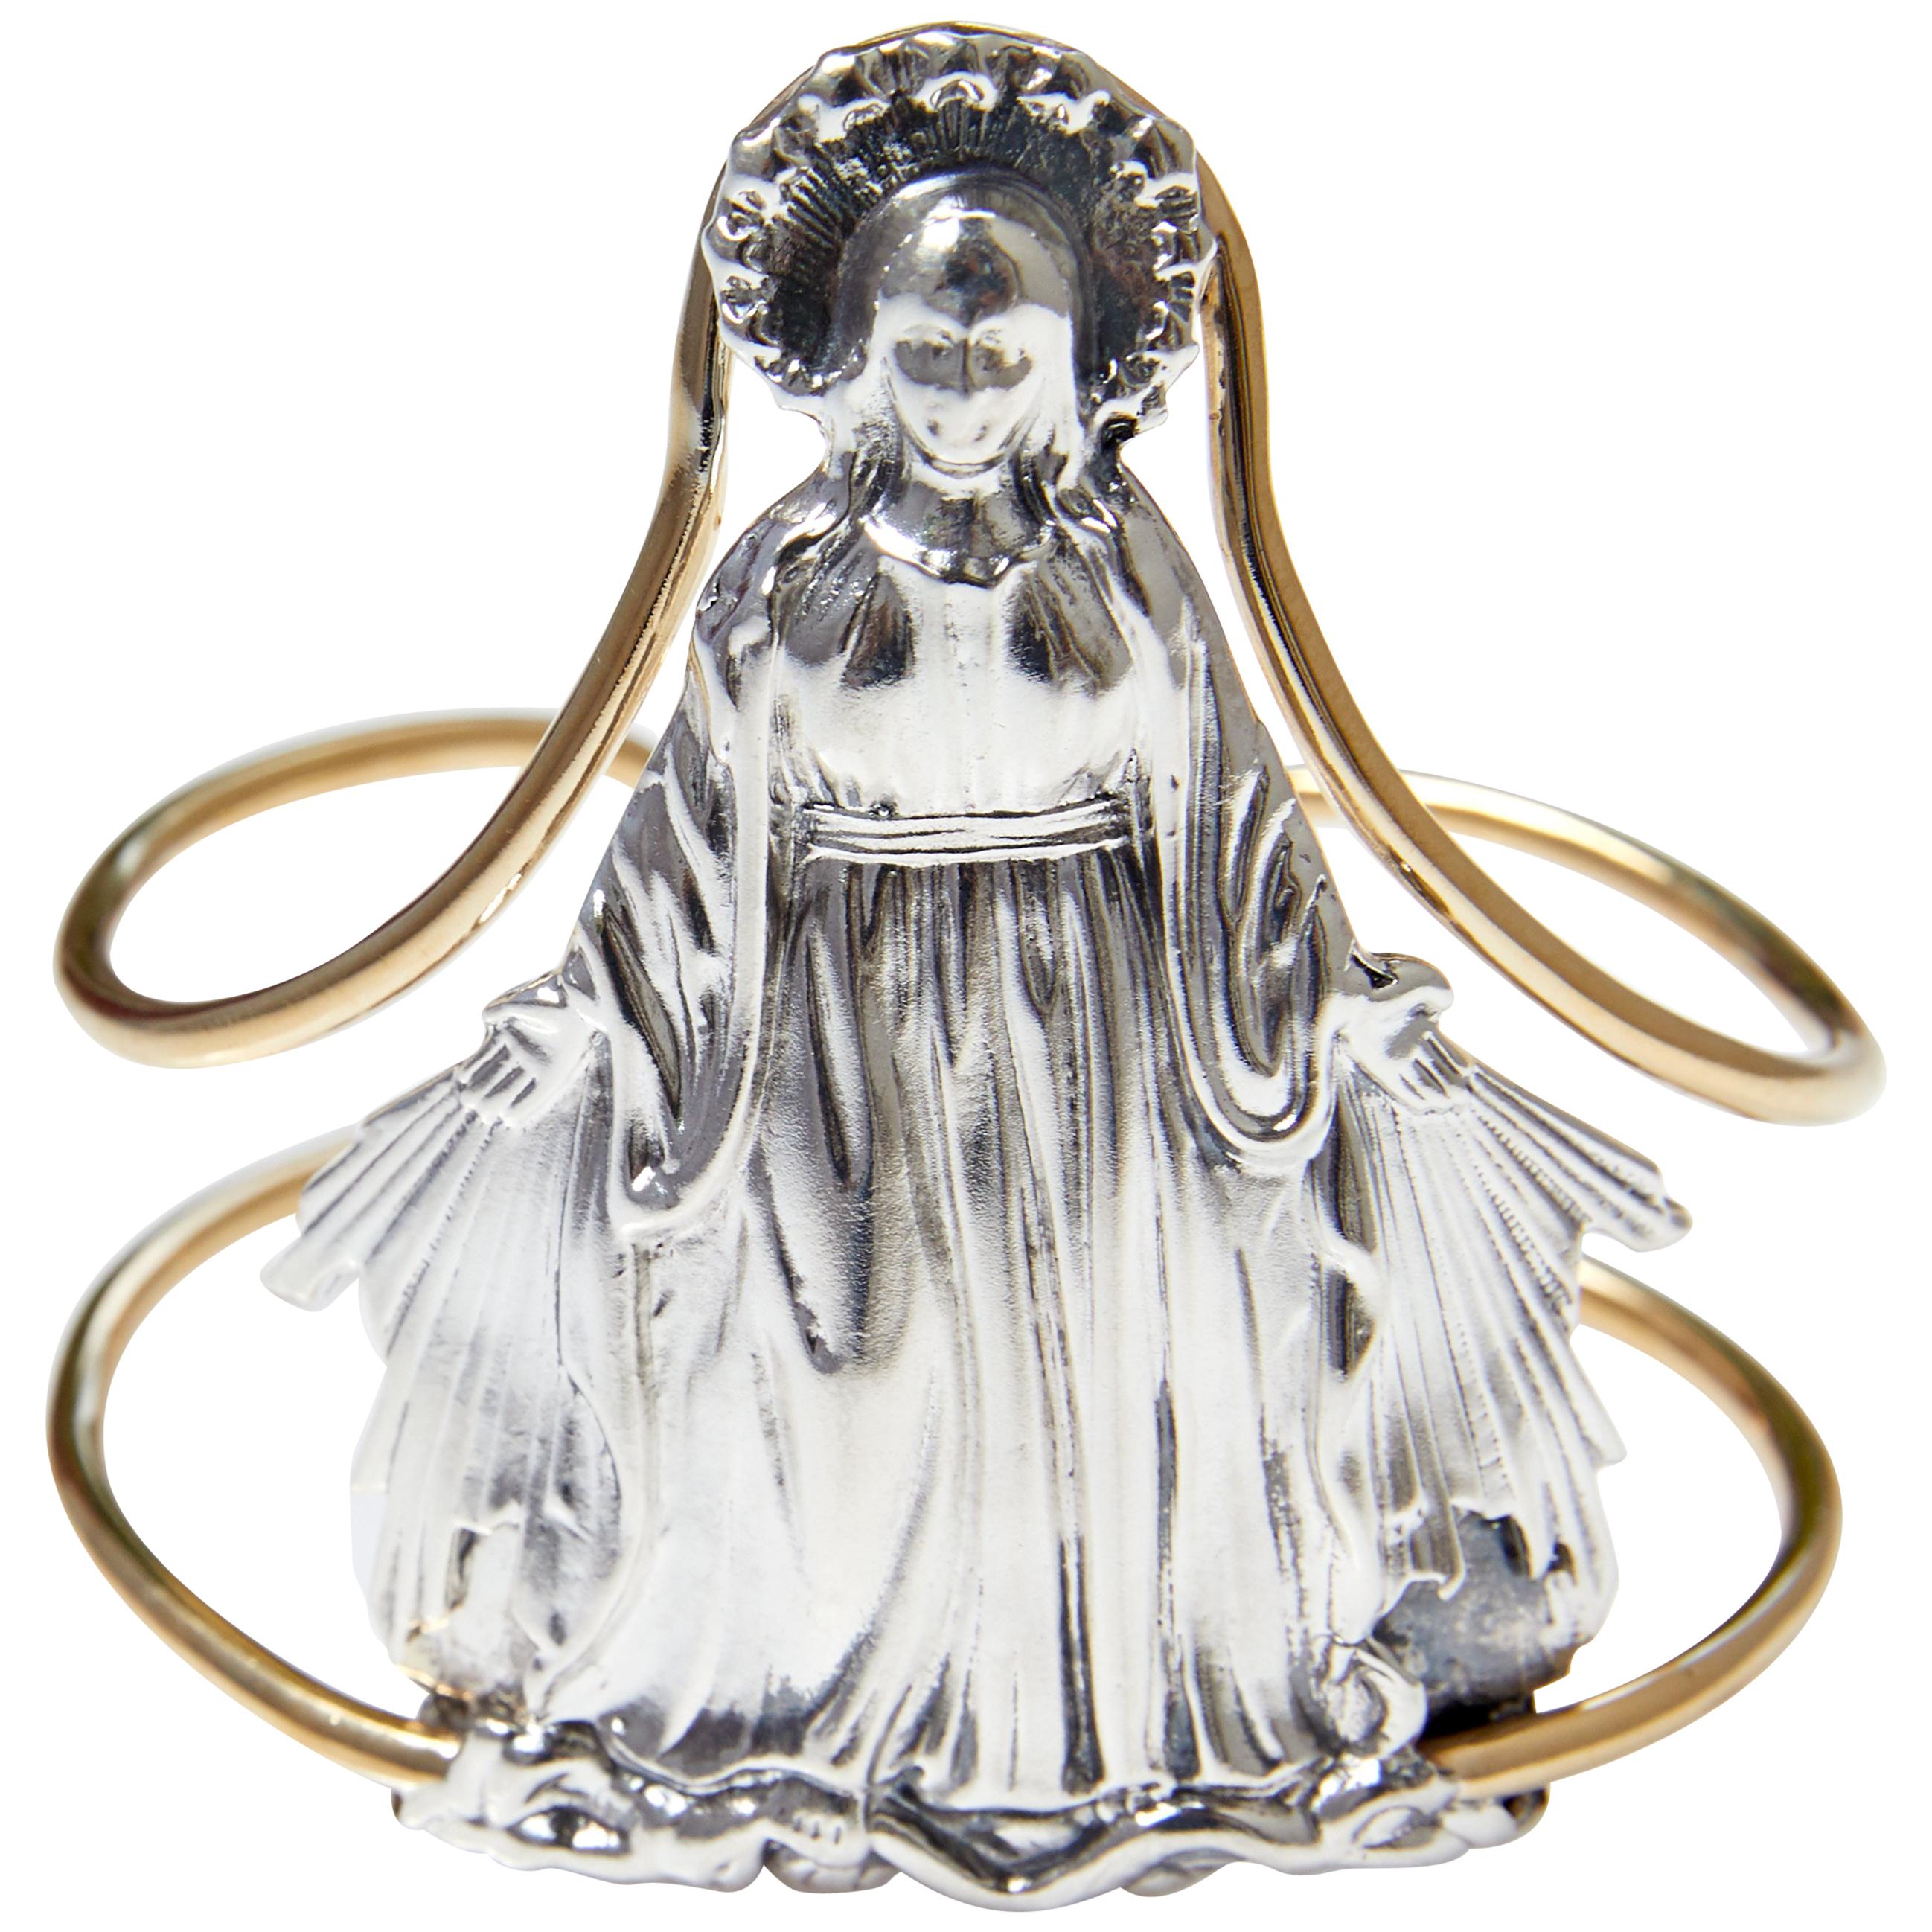 Virgin Mary Mother Mary Arm Cuff Bangle Bracelet Sterling Silver Brass J Dauphin For Sale